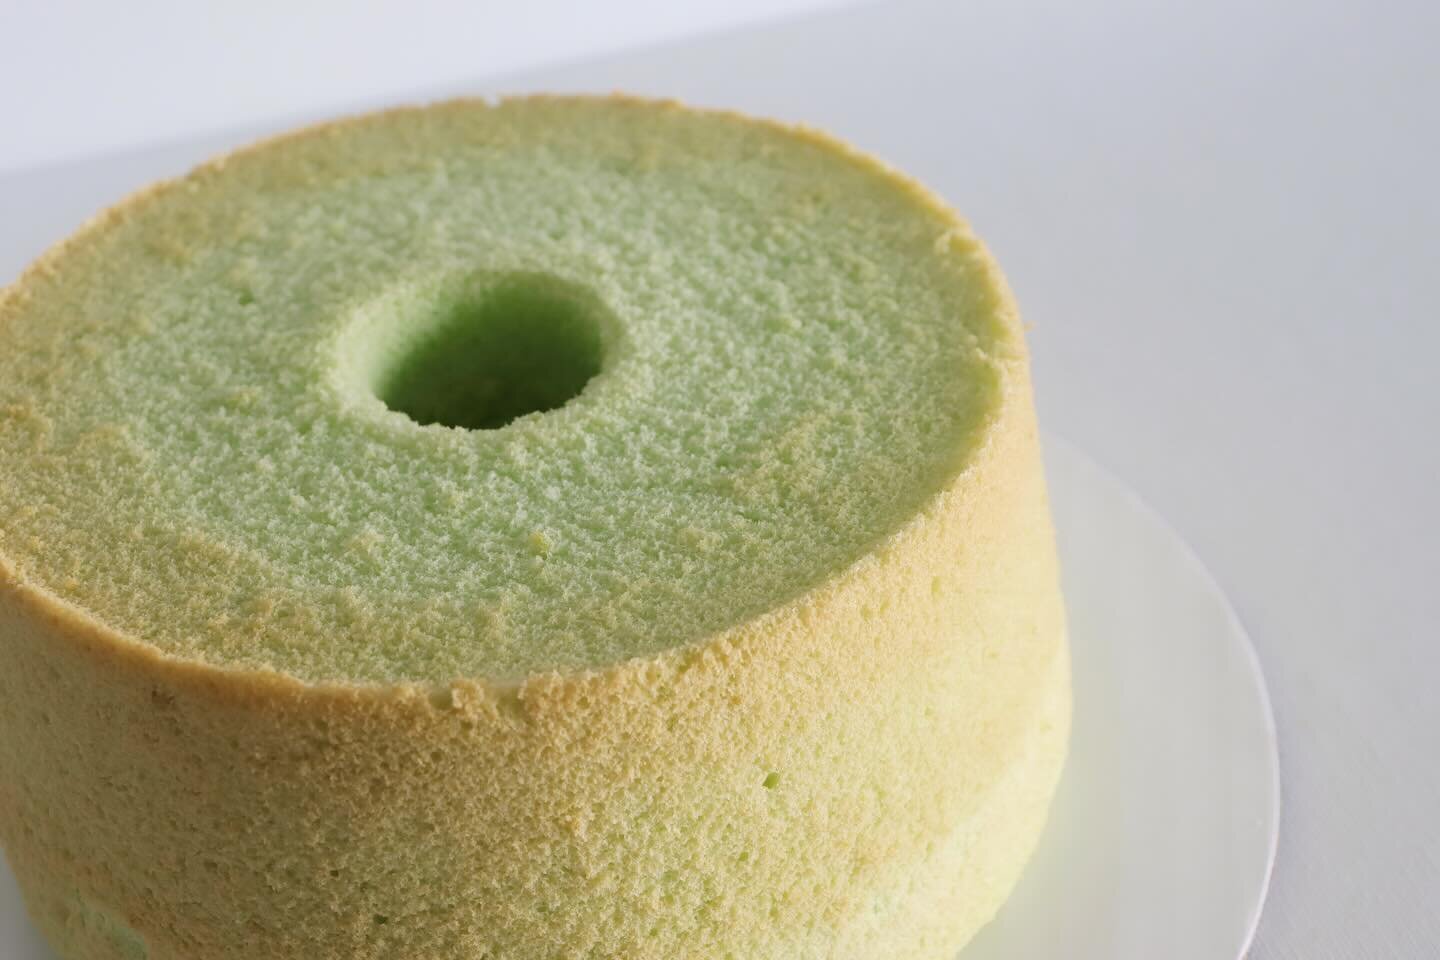 A simple joy!😋
No fancy decoration, glaze, icing or anything, just a simple, humble chiffon cake. Light, fluffy and moist. Pair with cafe or tea. Focusing on texture and flavour rather than the eye-catching look. 6 flavour choices are available. 

?